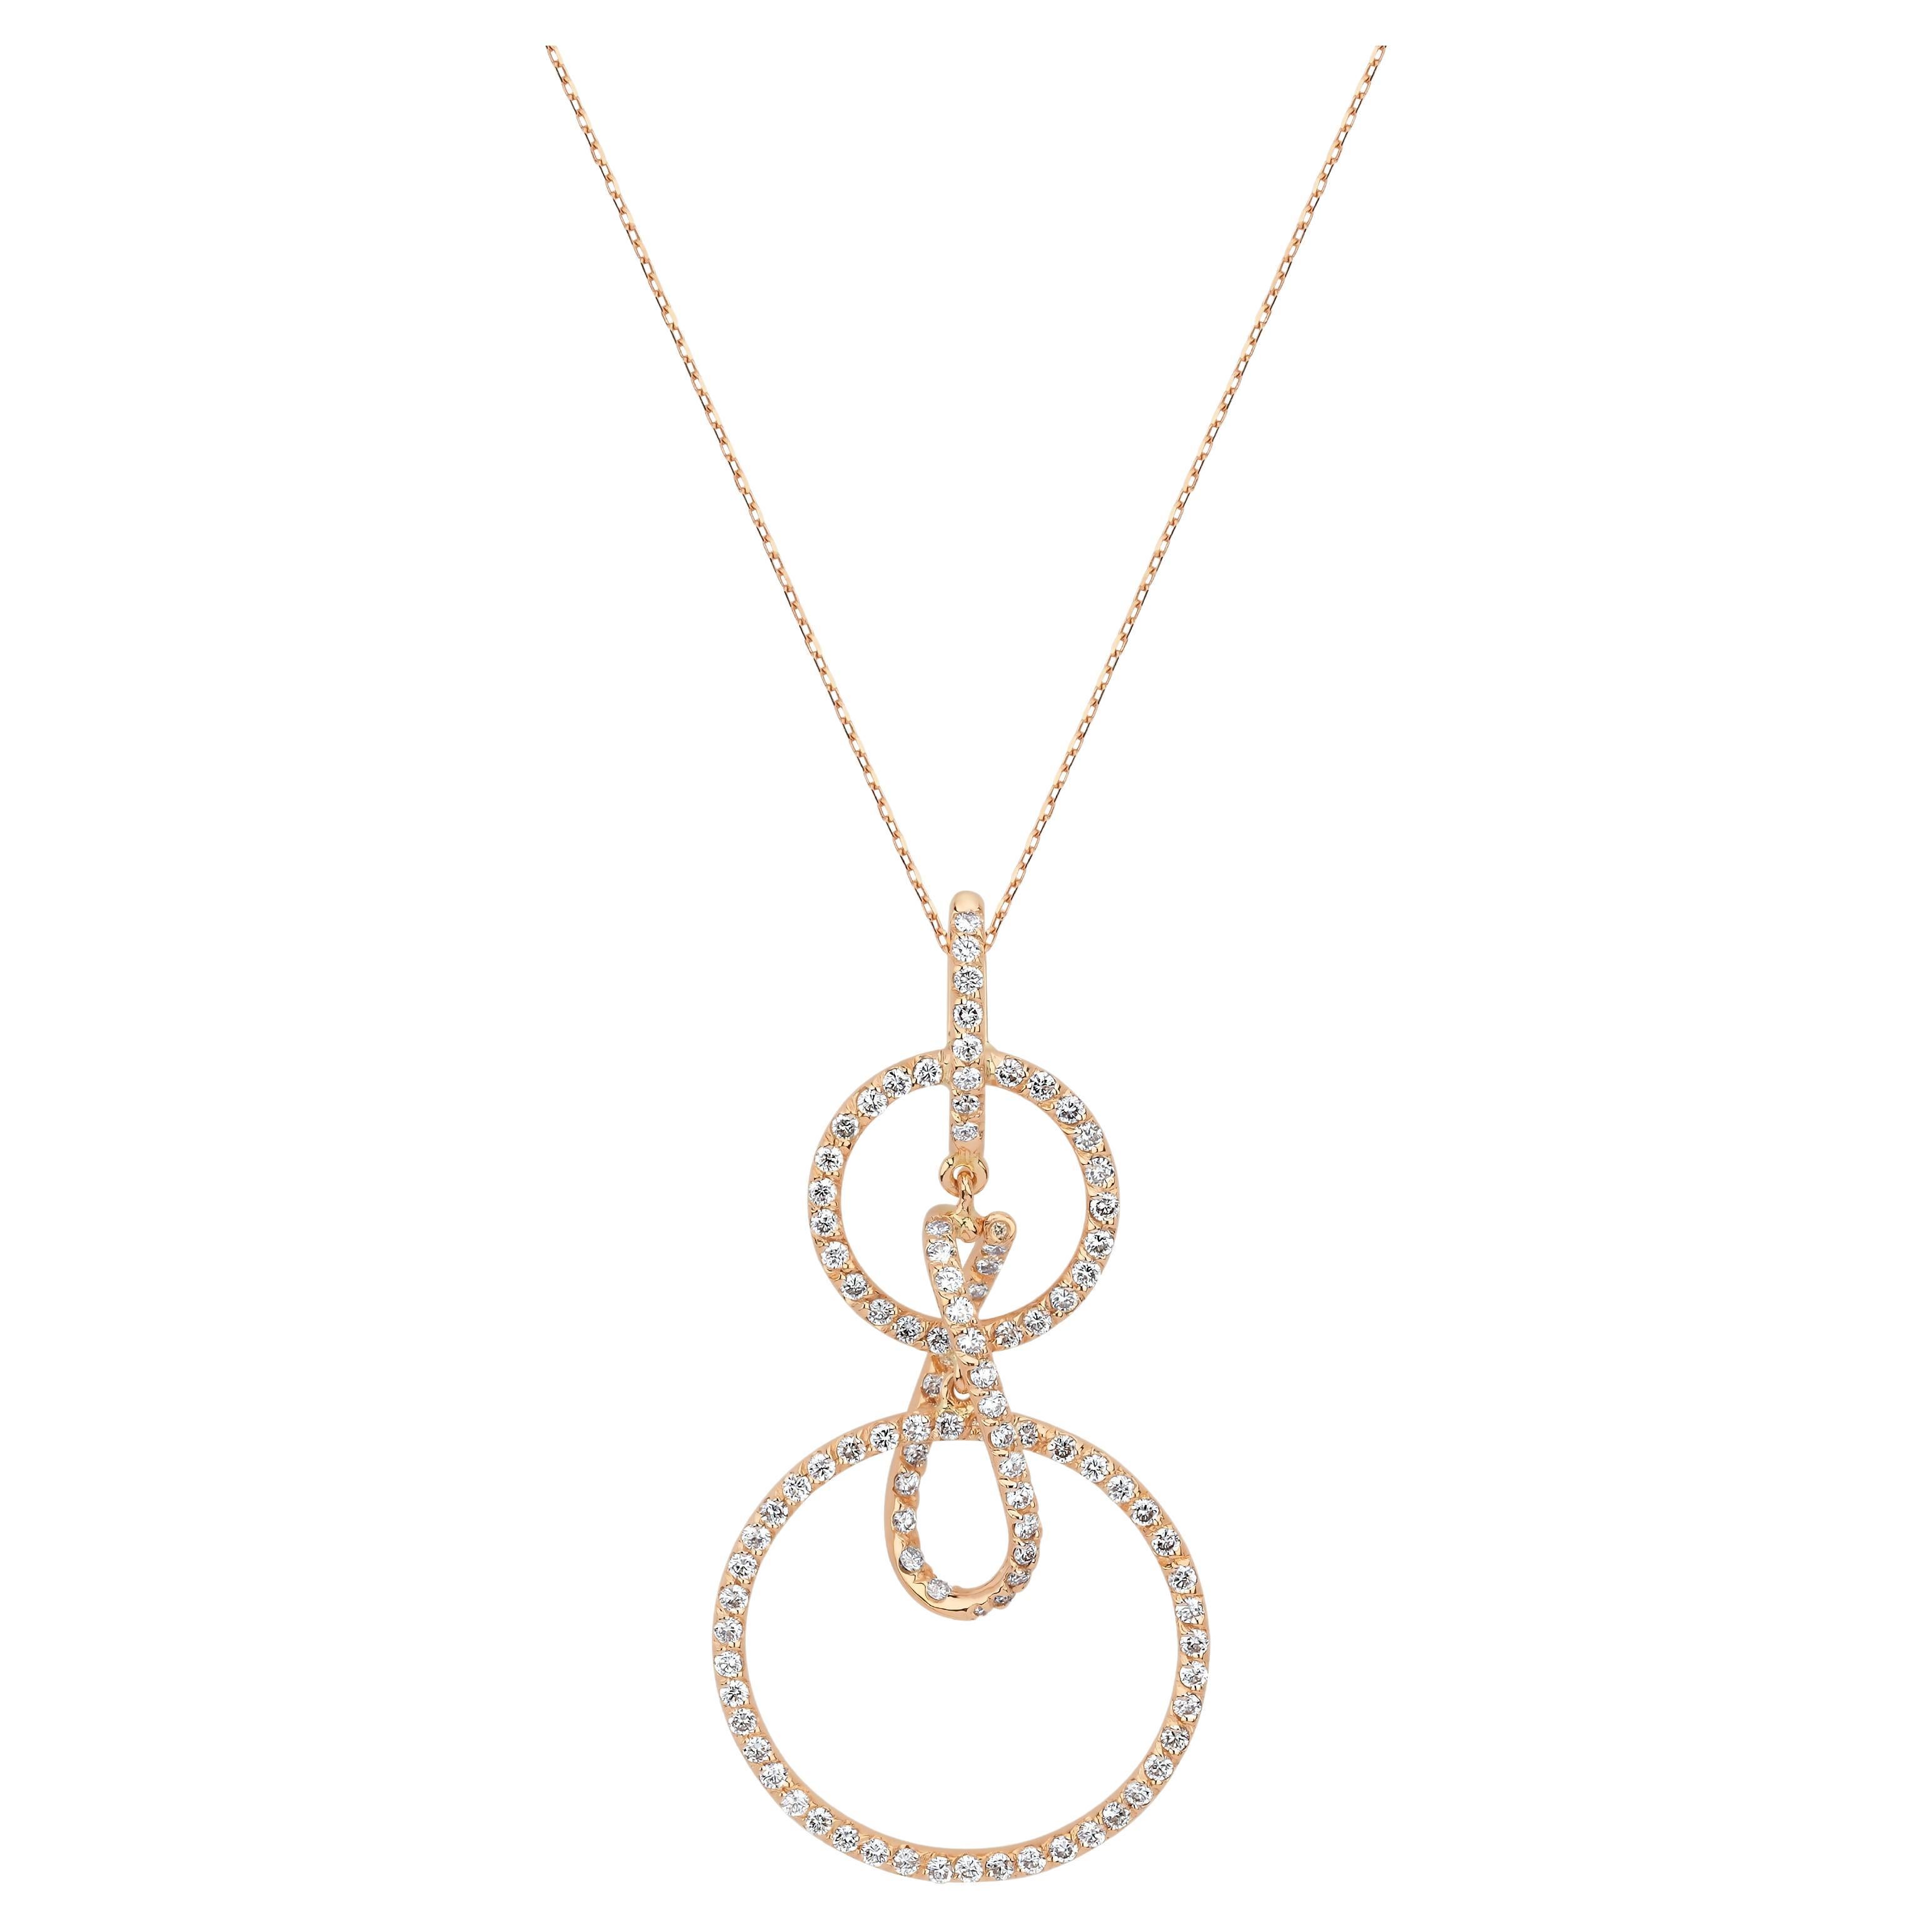 8k Gold Concentric Necklace For Sale